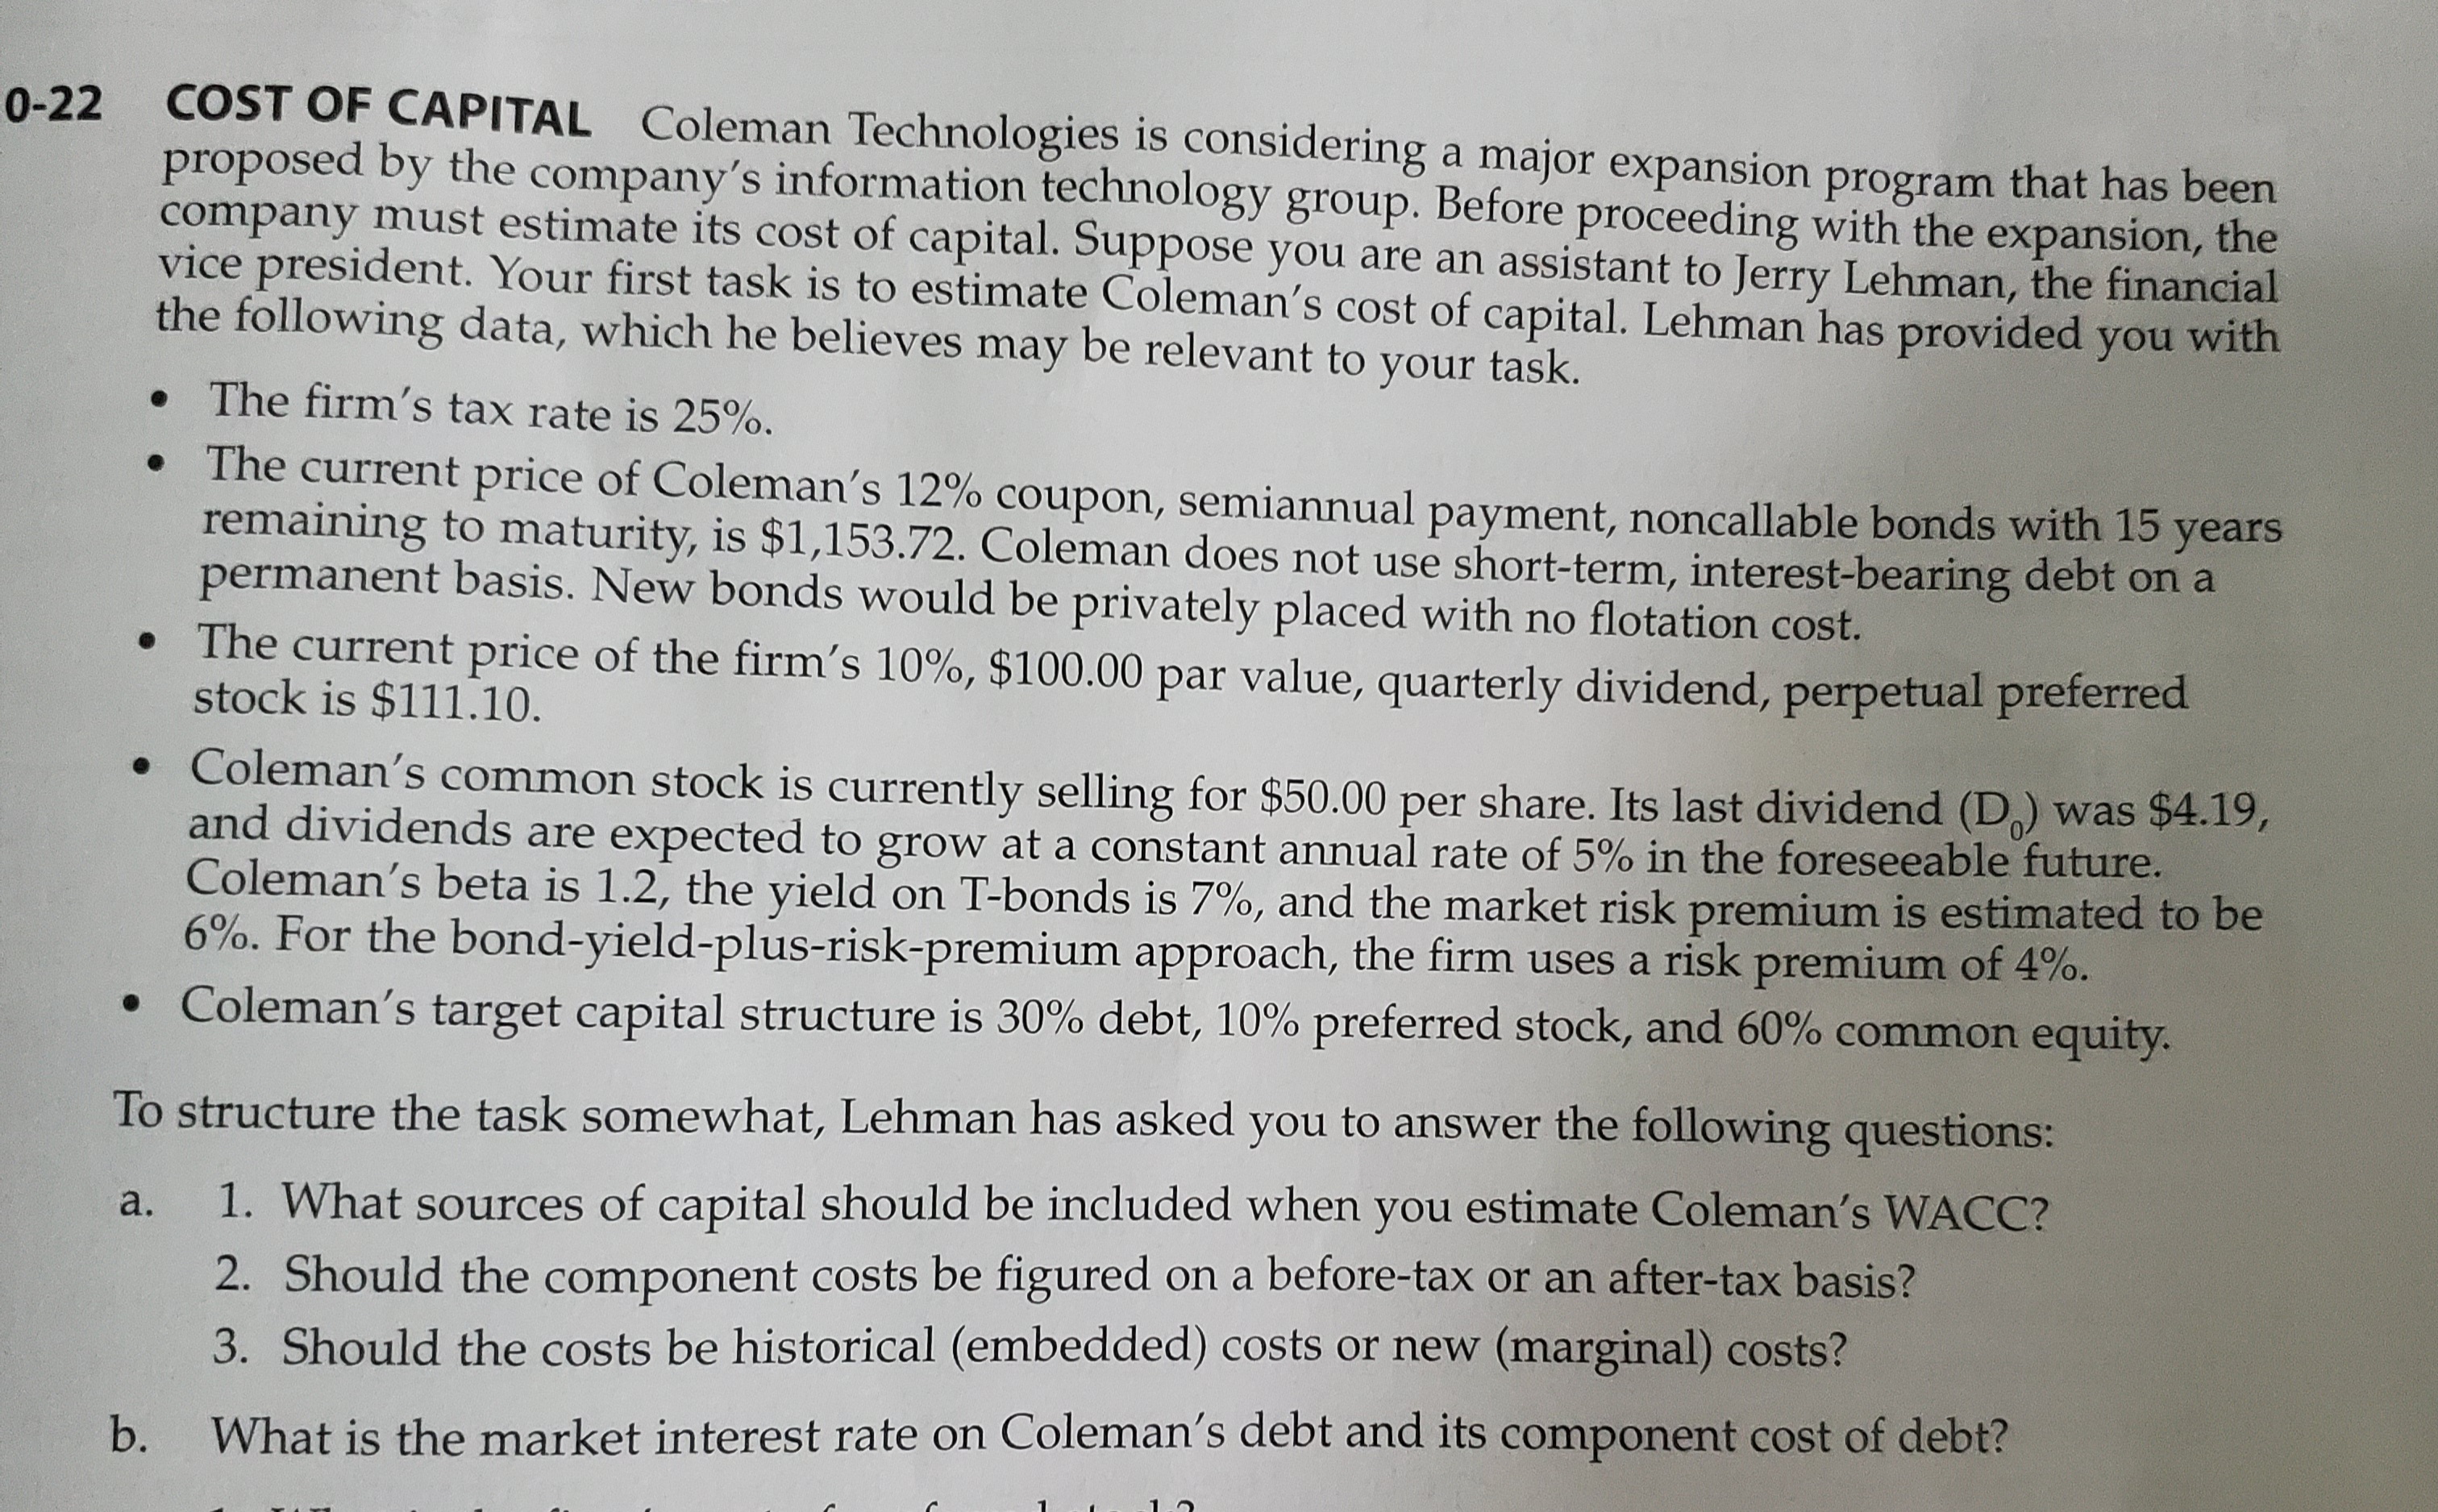 b. What is the market interest rate on Coleman's debt and its component cost of debt?
